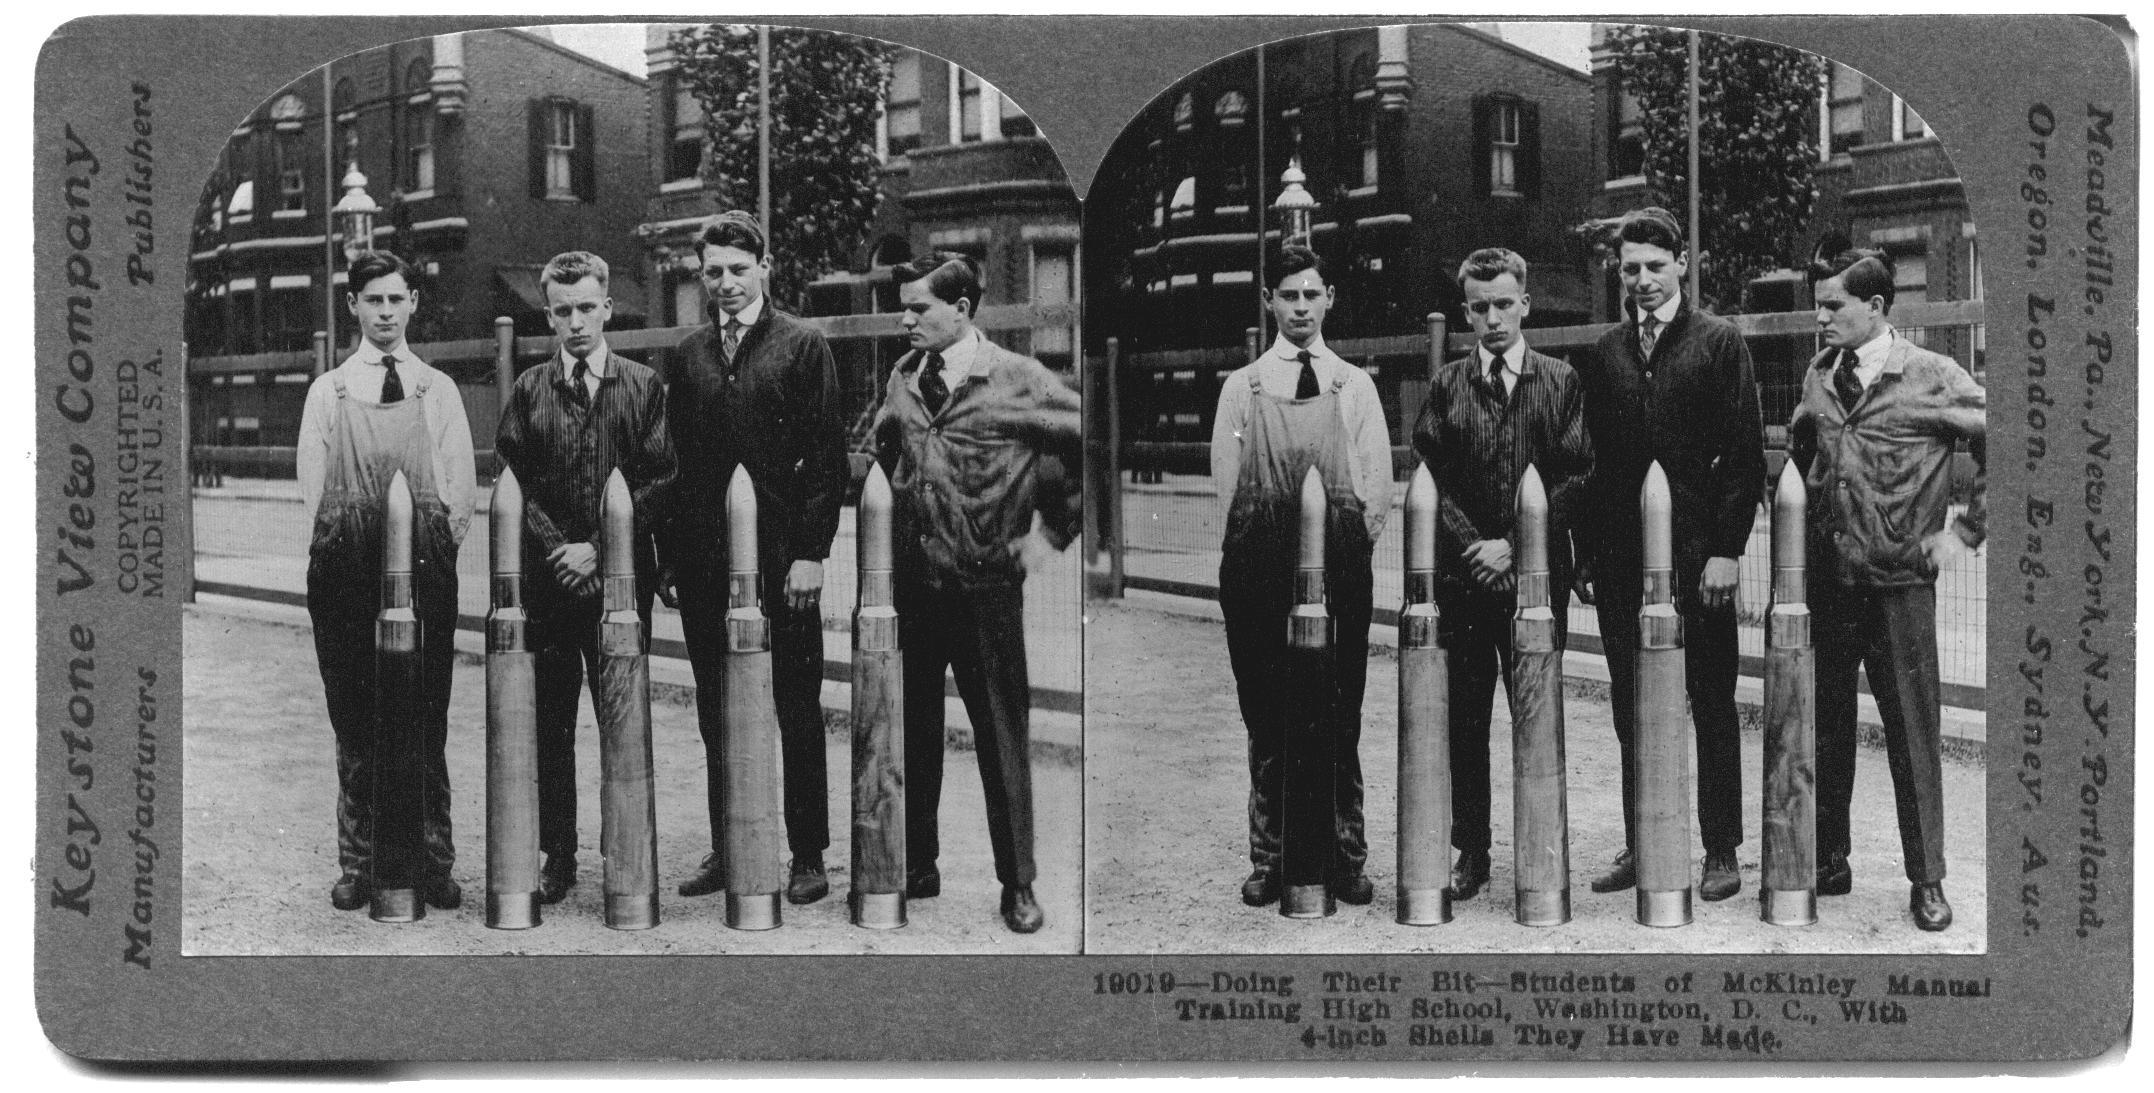 Doing Their Bit - Students at McKinley Manual Training High School, Washington, D.C., With 4-Inch Shells They Have Made